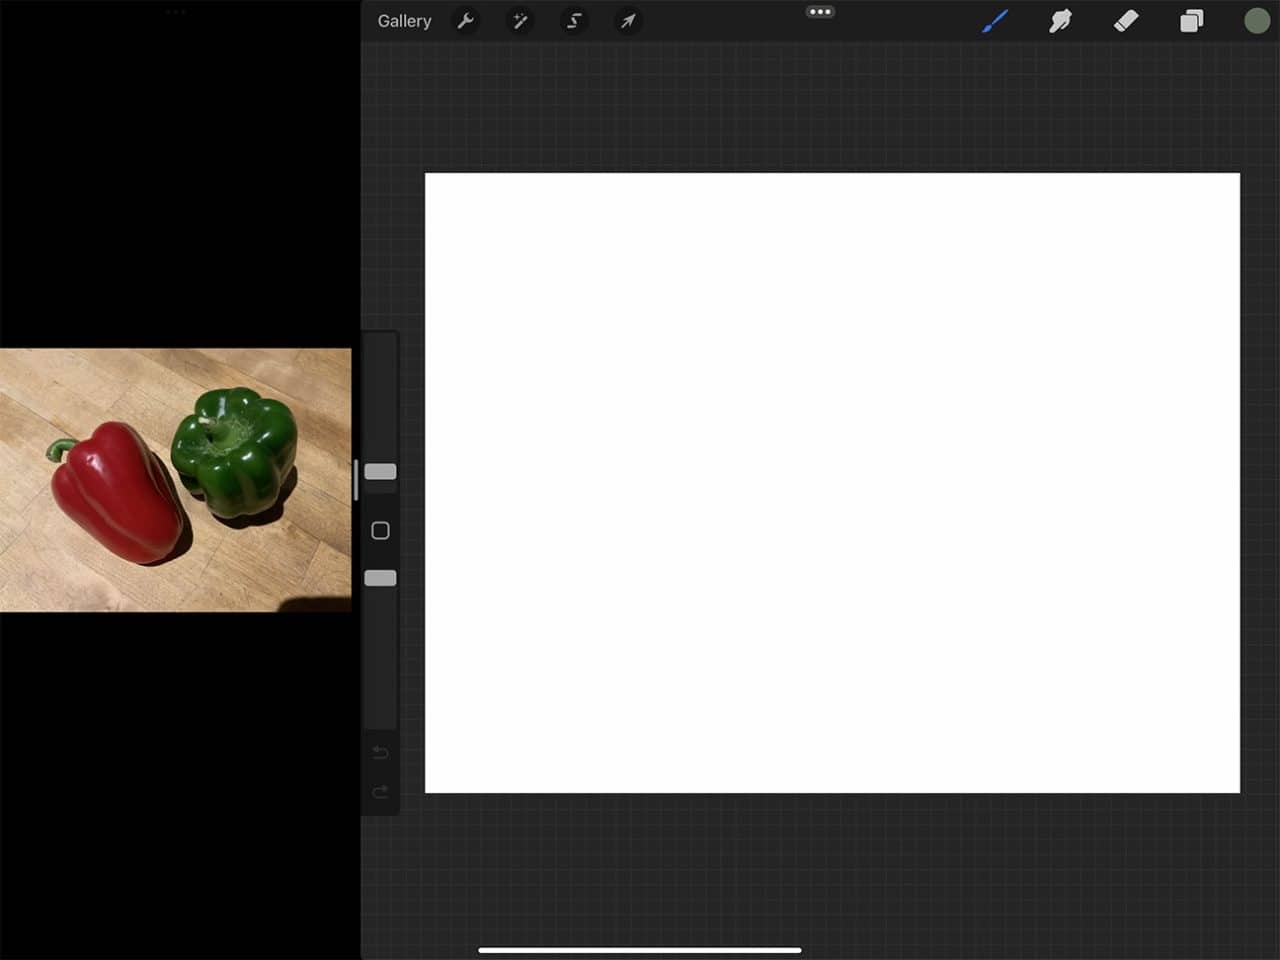 How to Draw a Capsicum: iPad Pro makes setting up a convenient split screen for working easy.